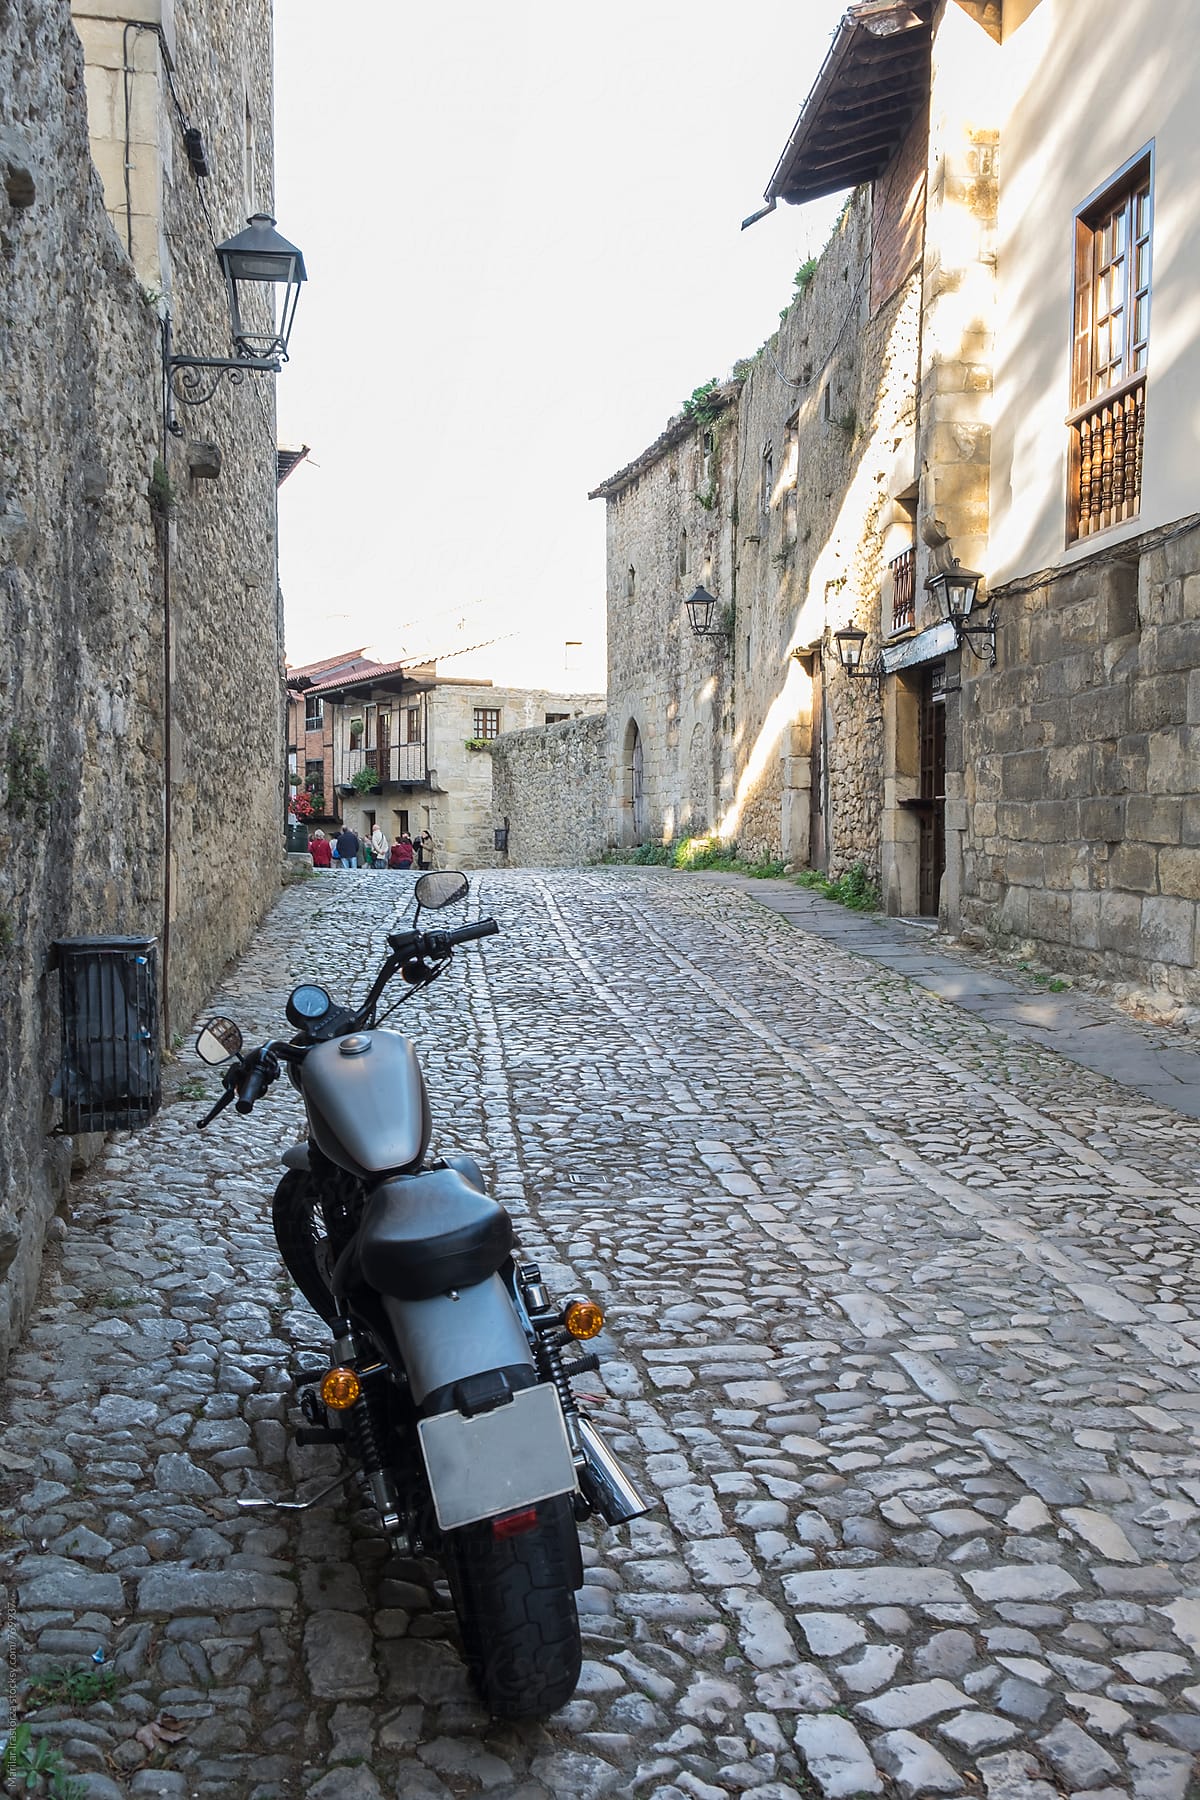 Motorcycle in a medieval town